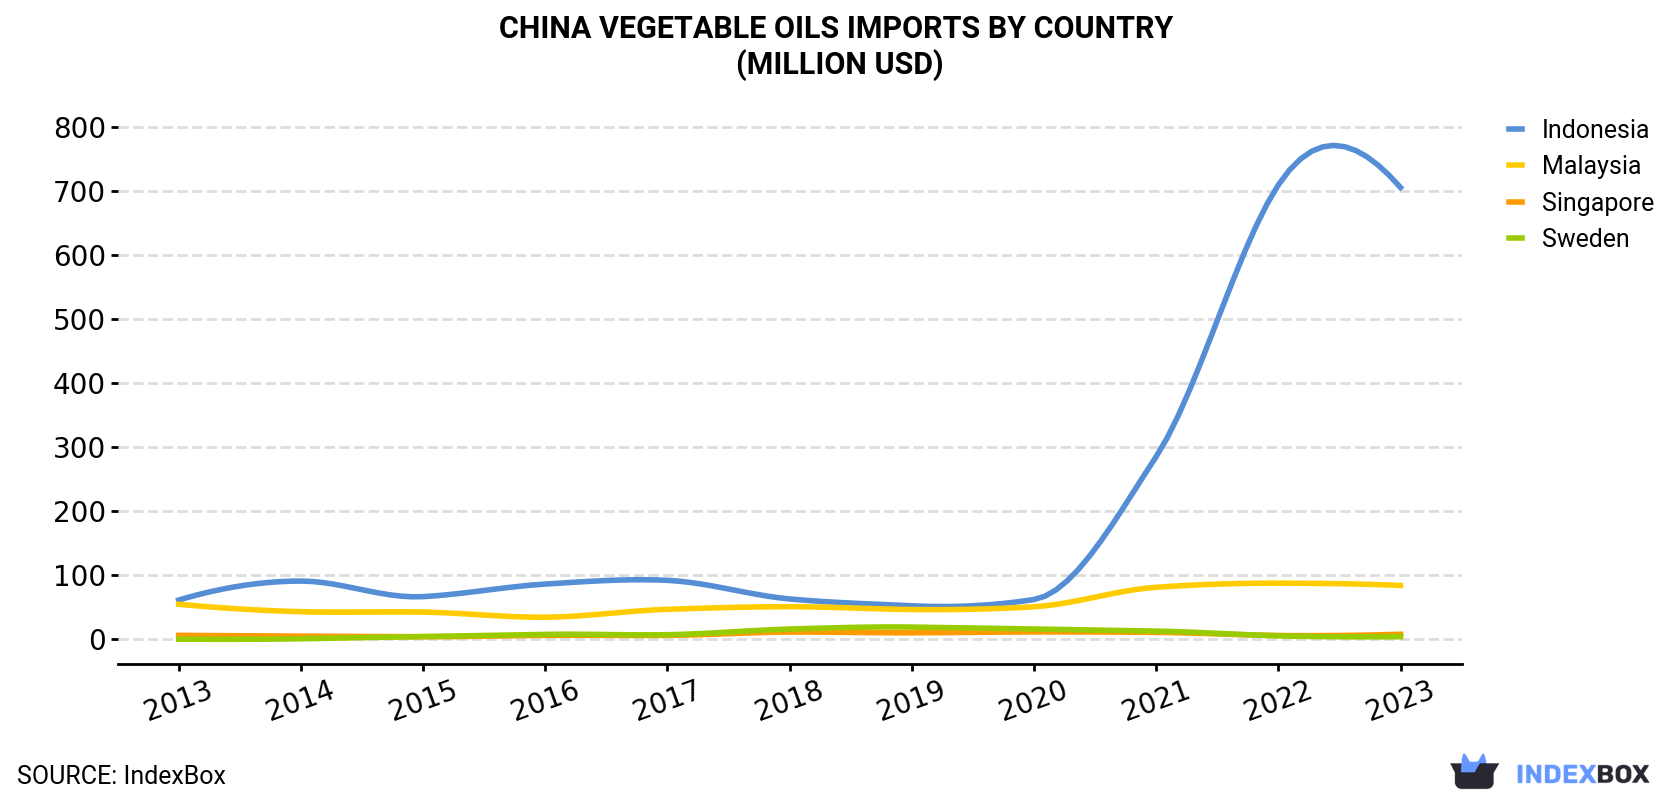 China Vegetable Oils Imports By Country (Million USD)